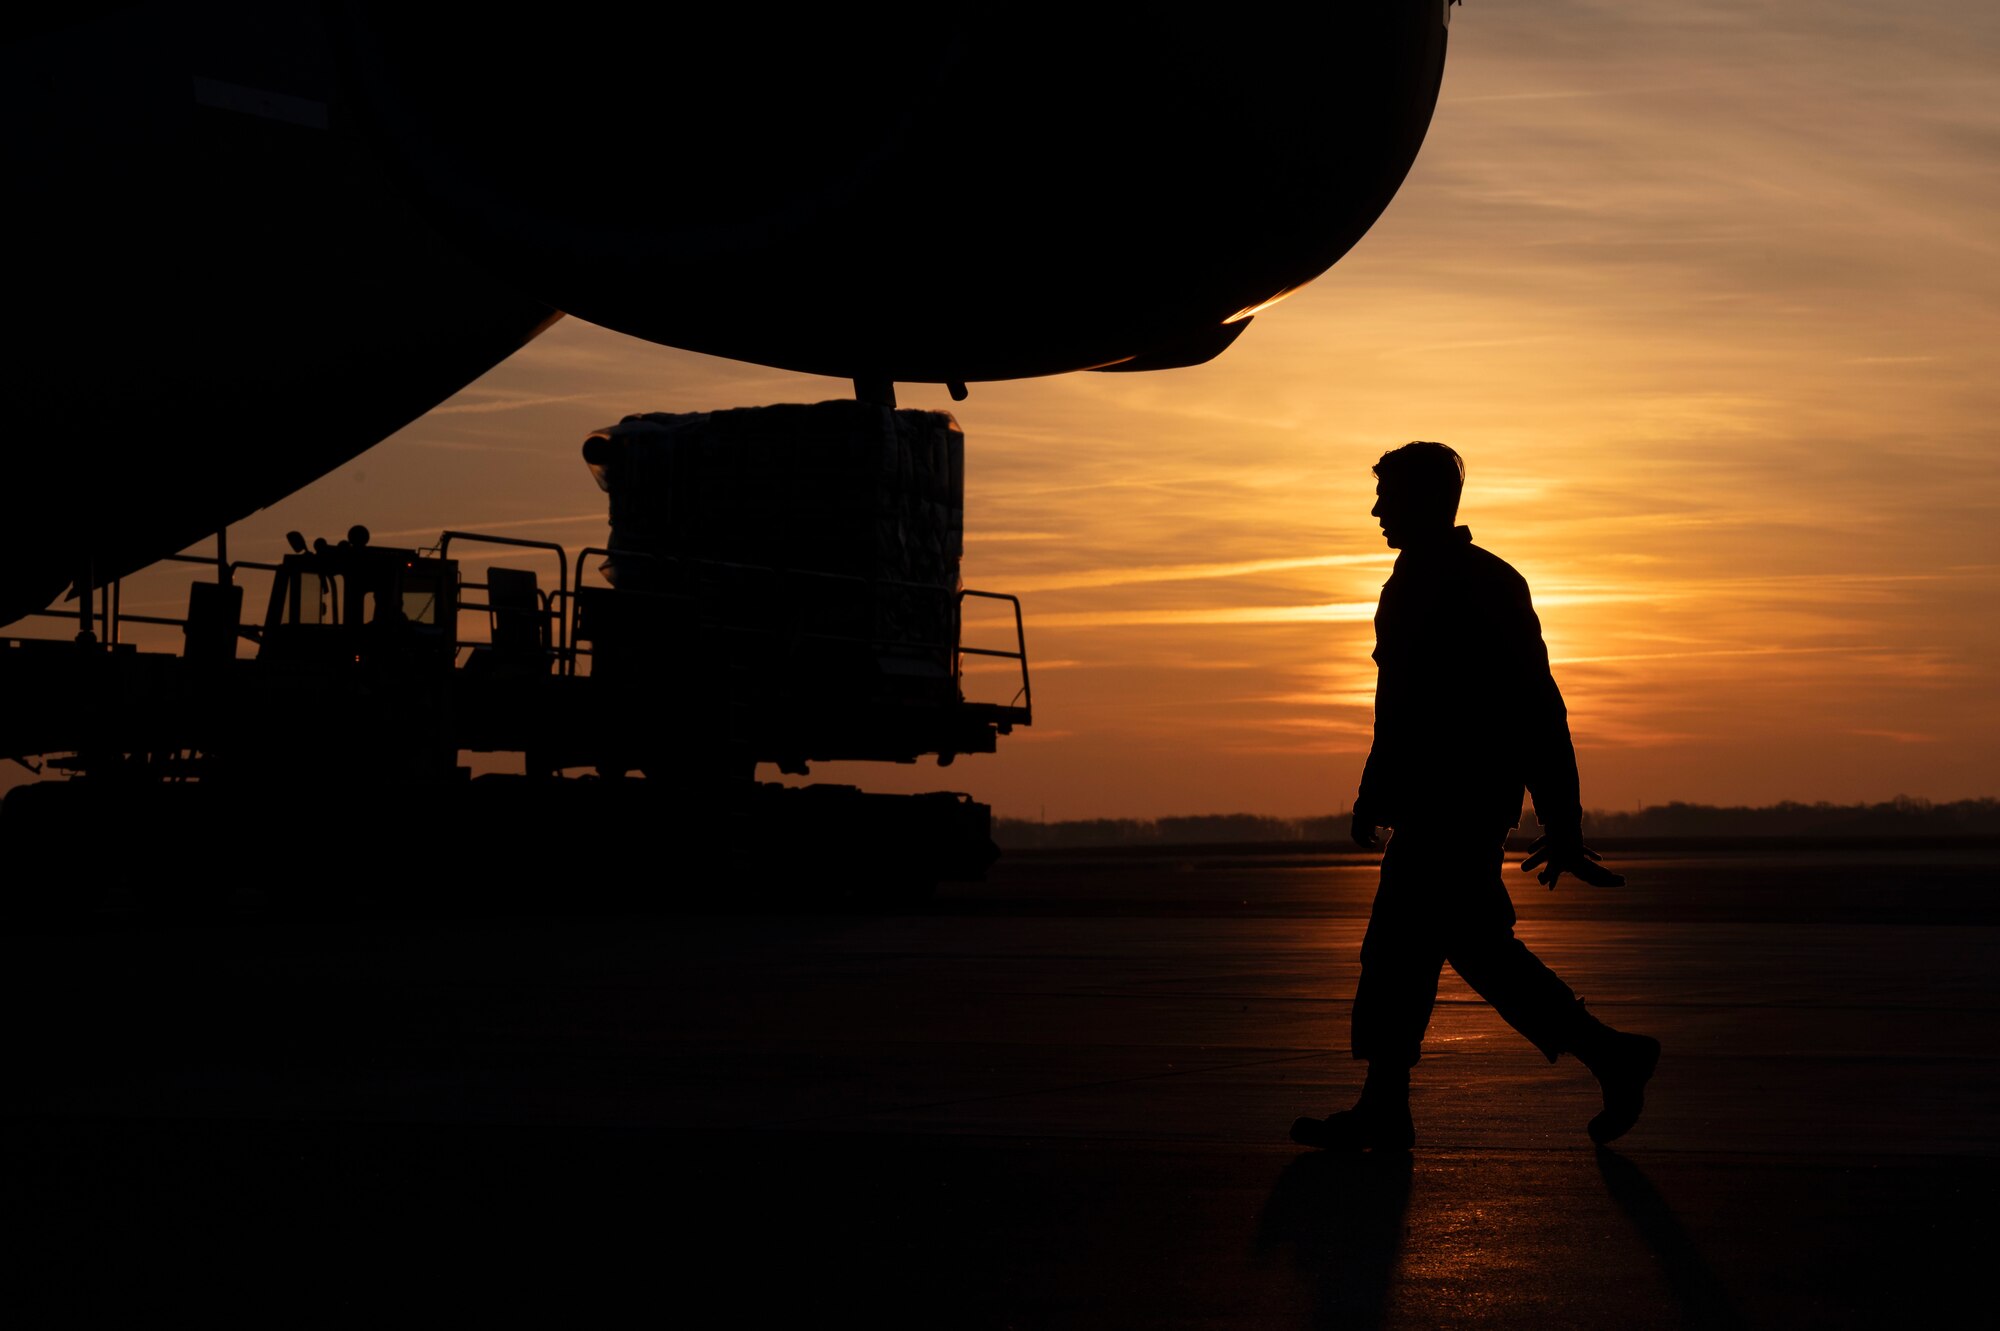 Senior Airman Kevin Linder, 436th Aerial Port Squadron passenger service representative, walks to a C-17 Globemaster III on Dover Air Force Base, Delaware, Feb. 7, 2023. The U.S. Agency for International Development (USAID) is mobilizing emergency humanitarian assistance to respond to the devastating impacts in Türkiye following the worst earthquake to hit the region in almost a century. (U.S. Air Force photo by Staff Sgt. Marco A. Gomez)